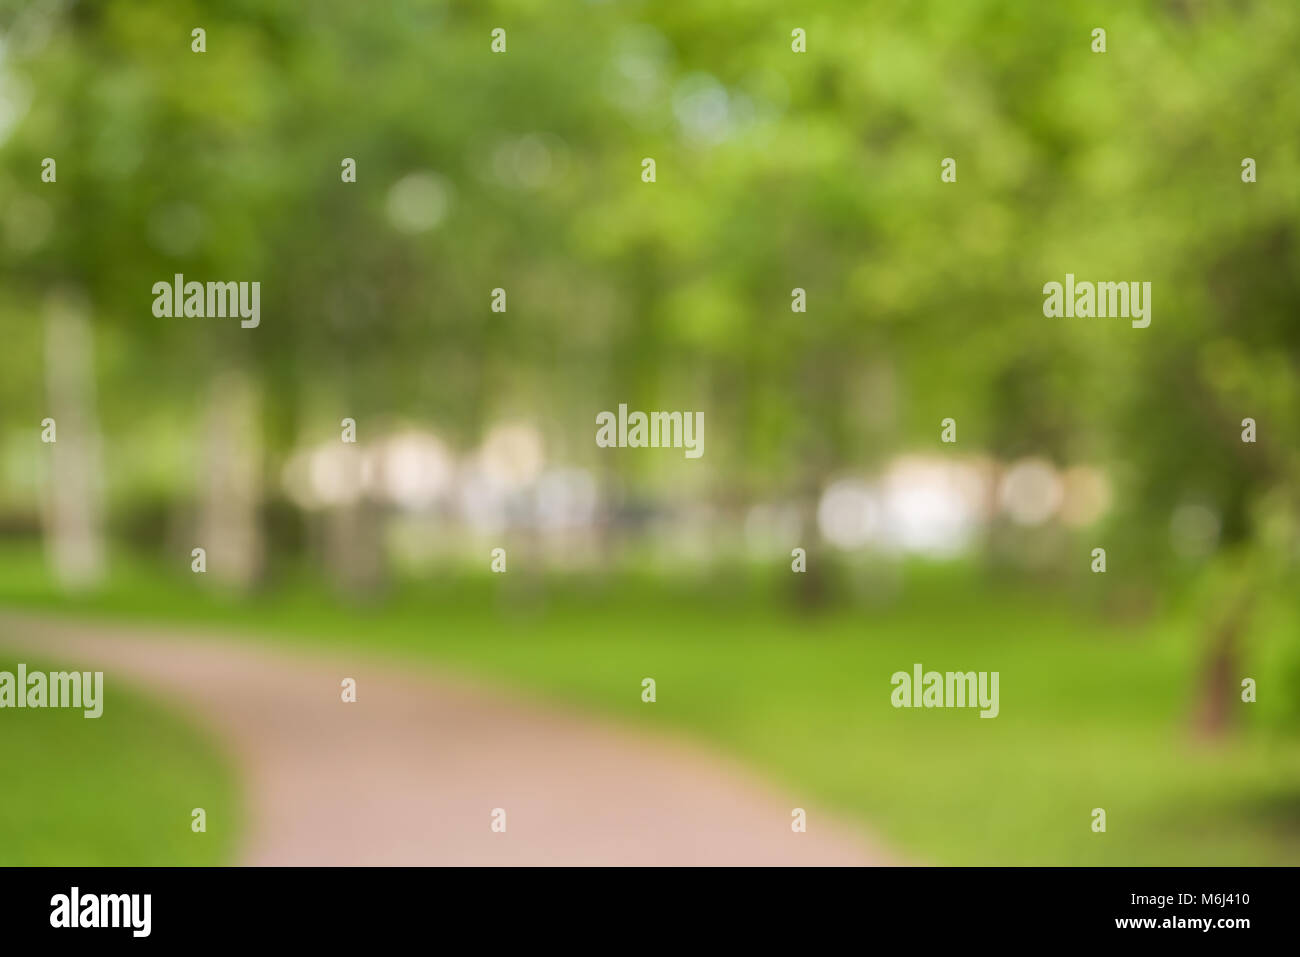 outdoor blurred background of park on a summer day Stock Photo